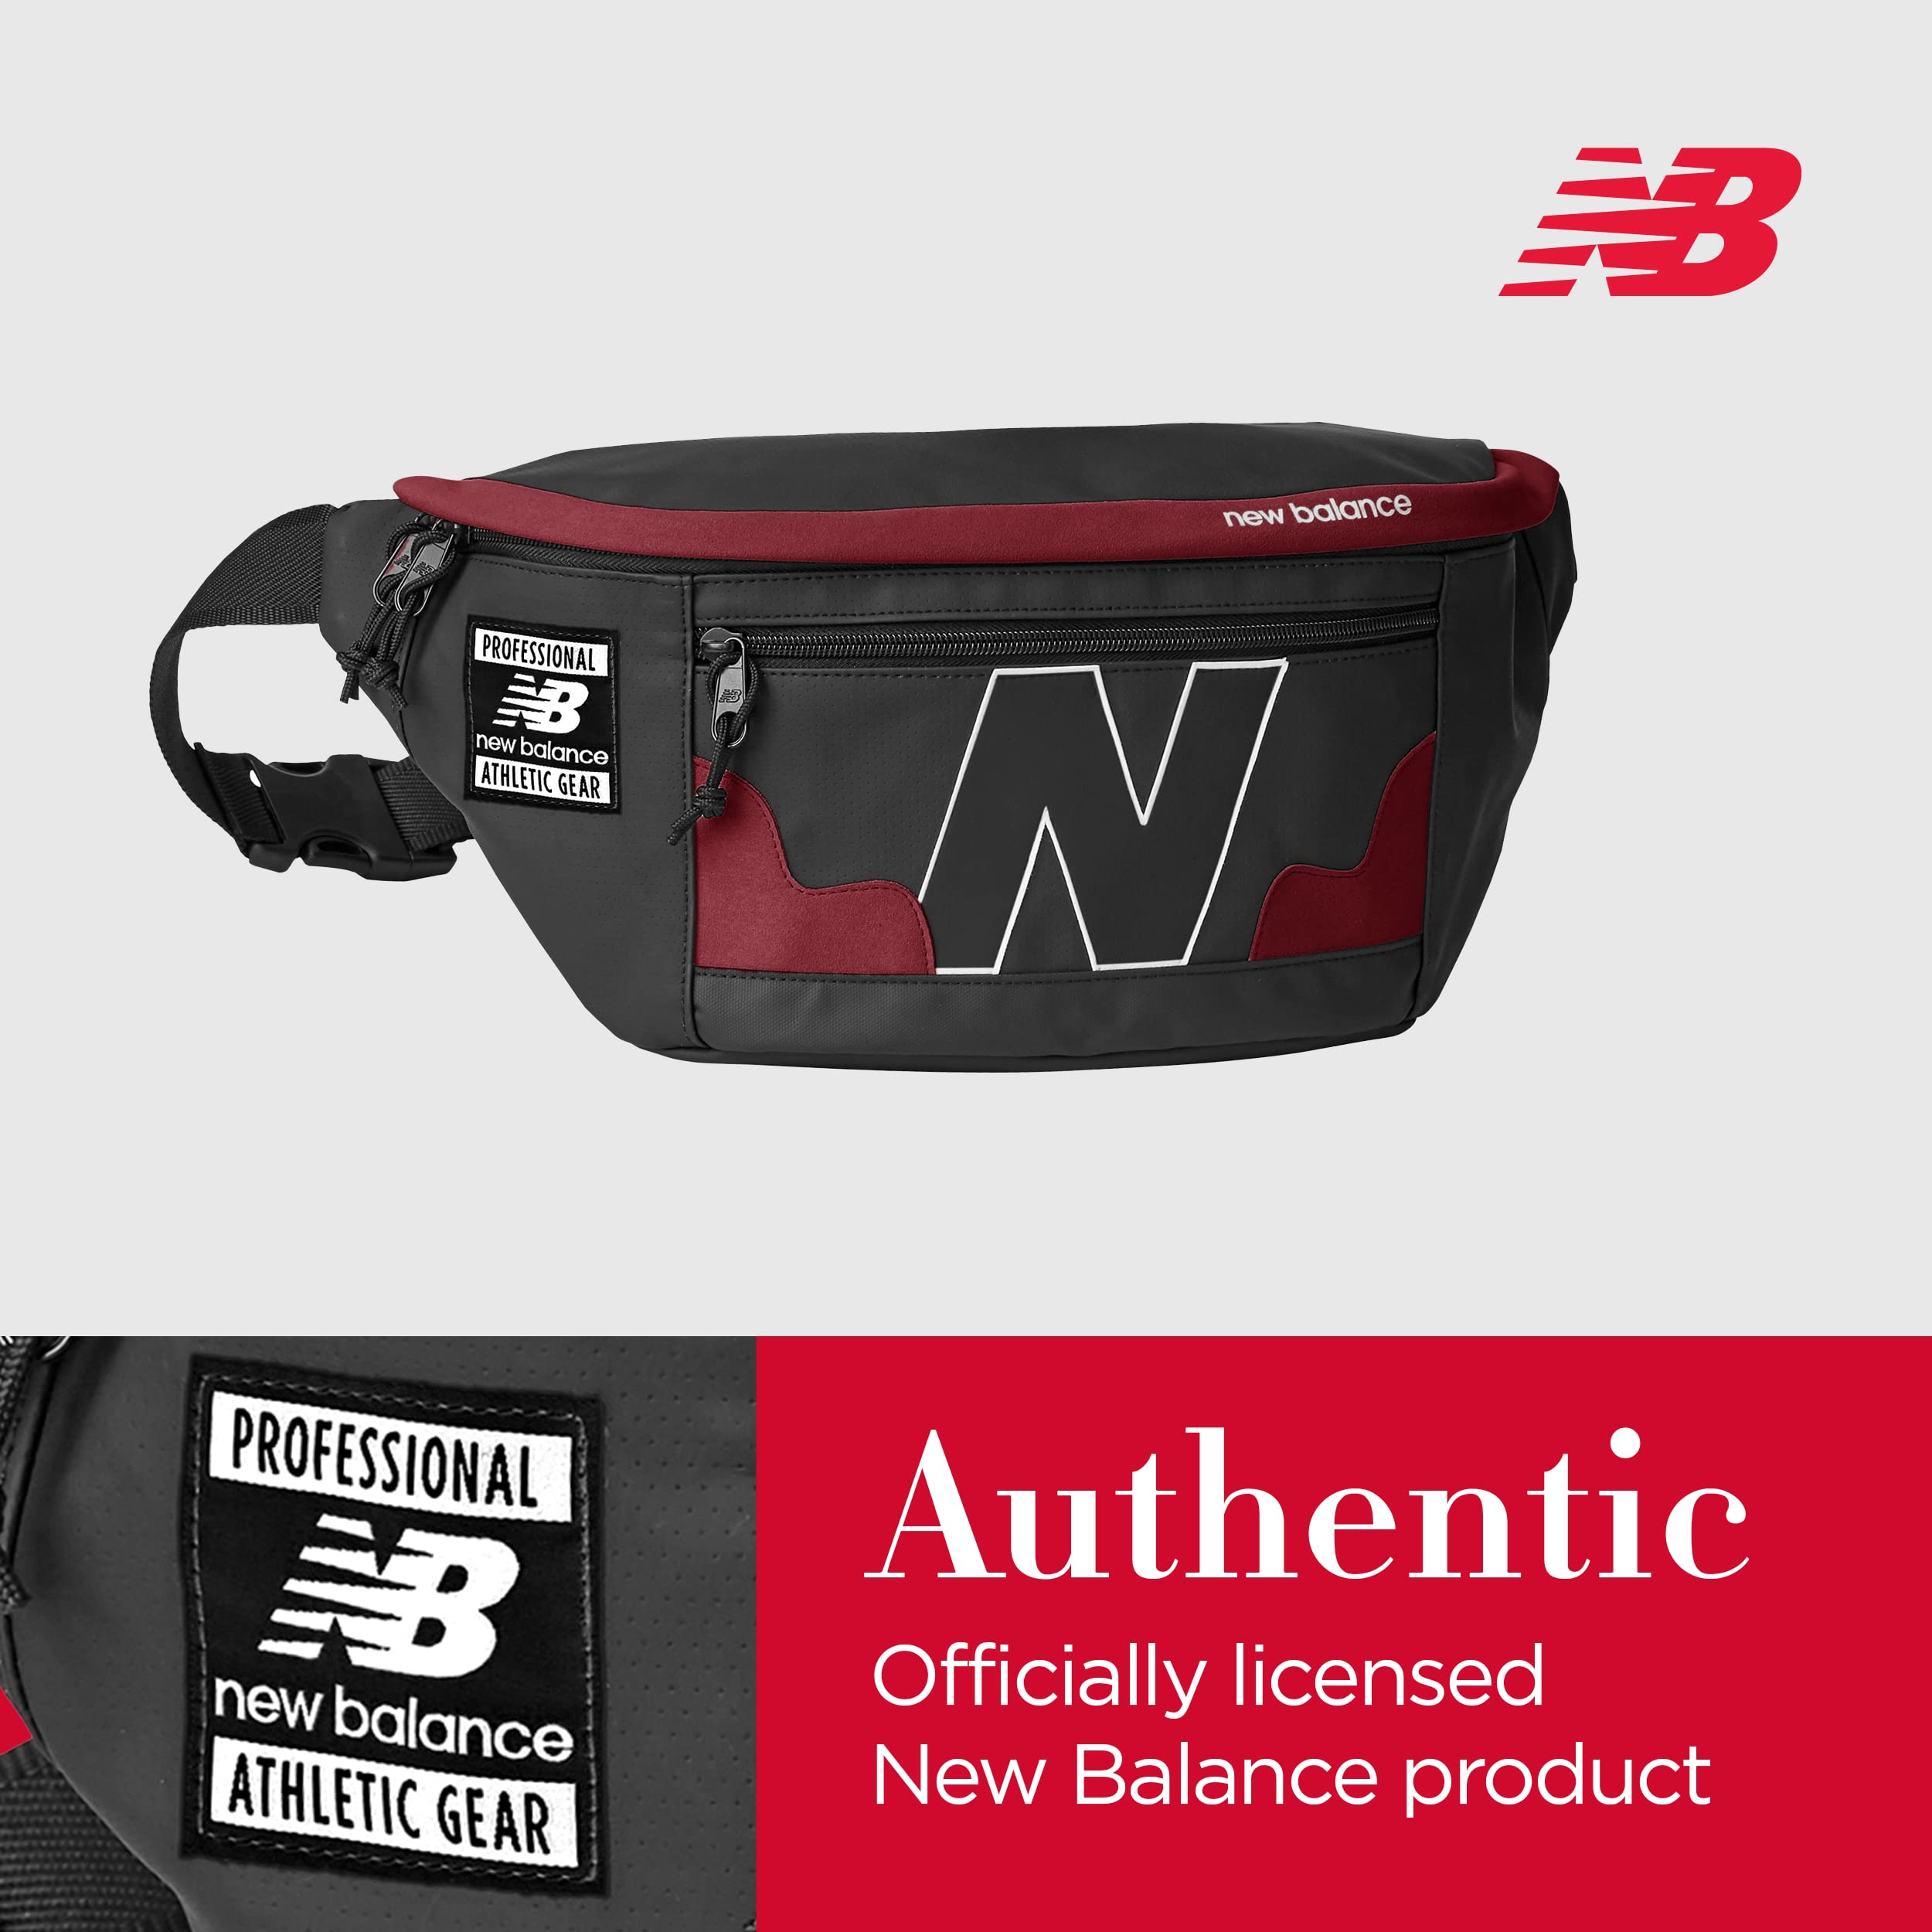 Concept One New Balance Fanny Pack, Legacy Waist Bag for Men and Women